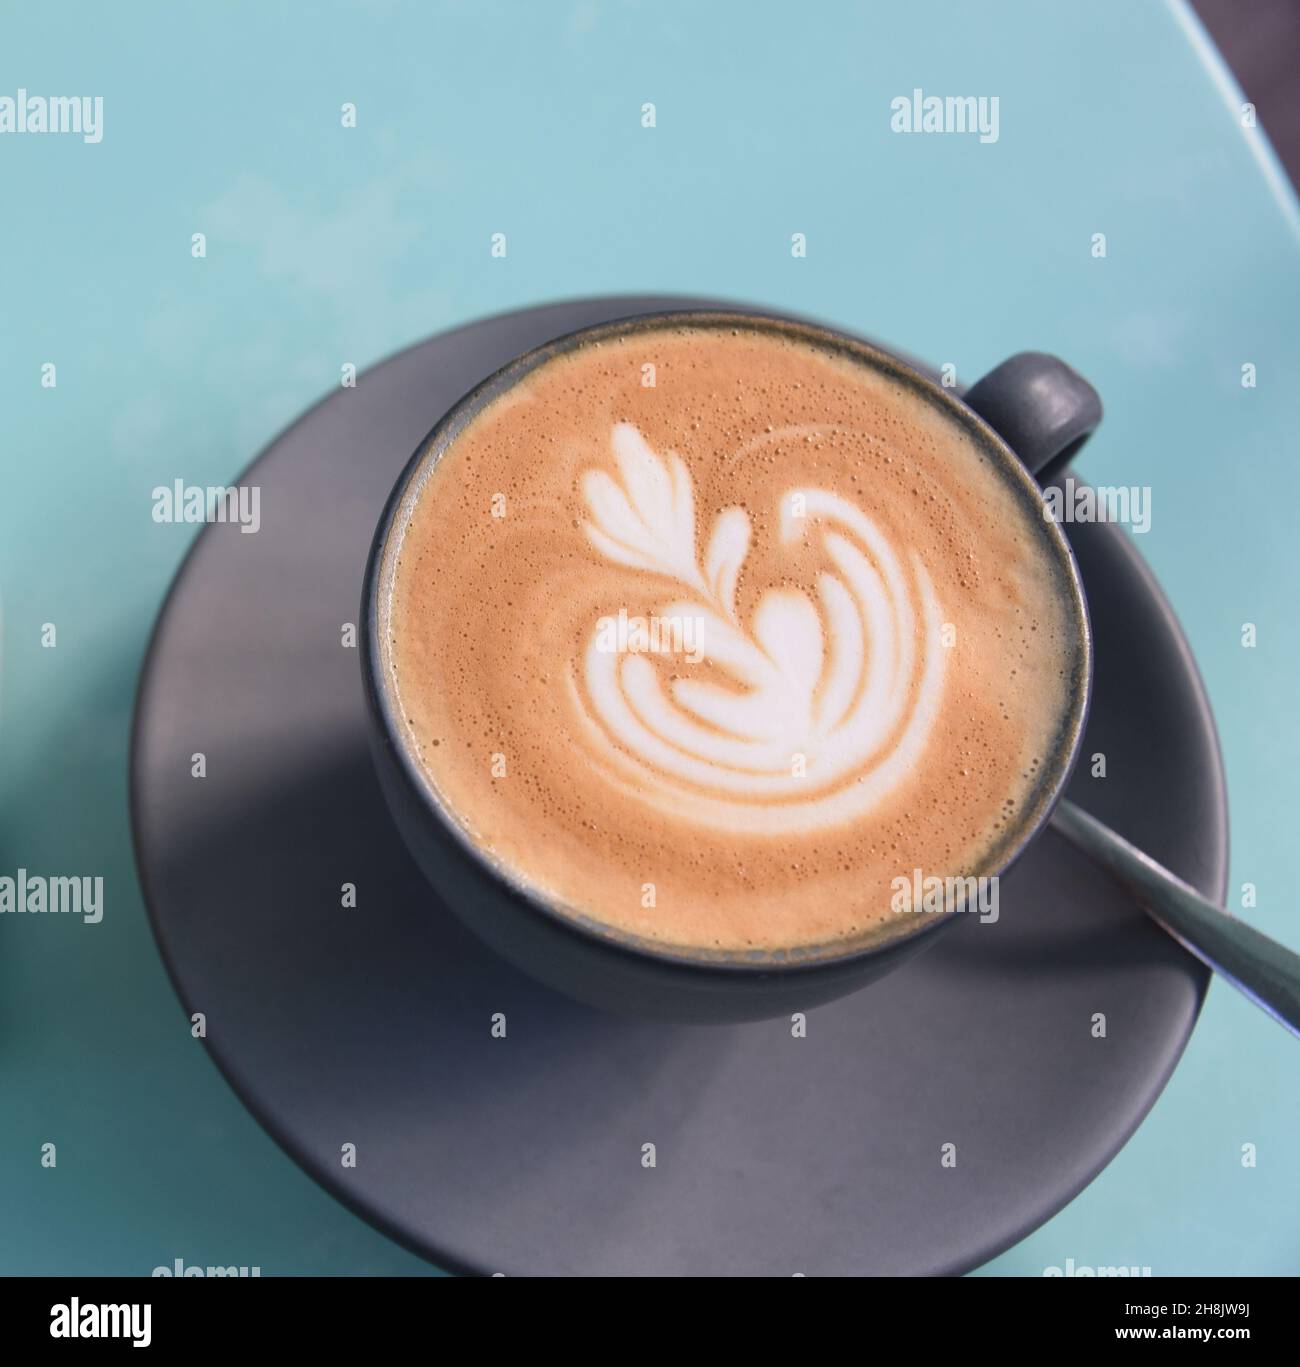 Large Format close up of a Cappuccino coffee with a fancy design in the foam.  Served on the terrace of a Savannah, Georgia restaurant. Stock Photo